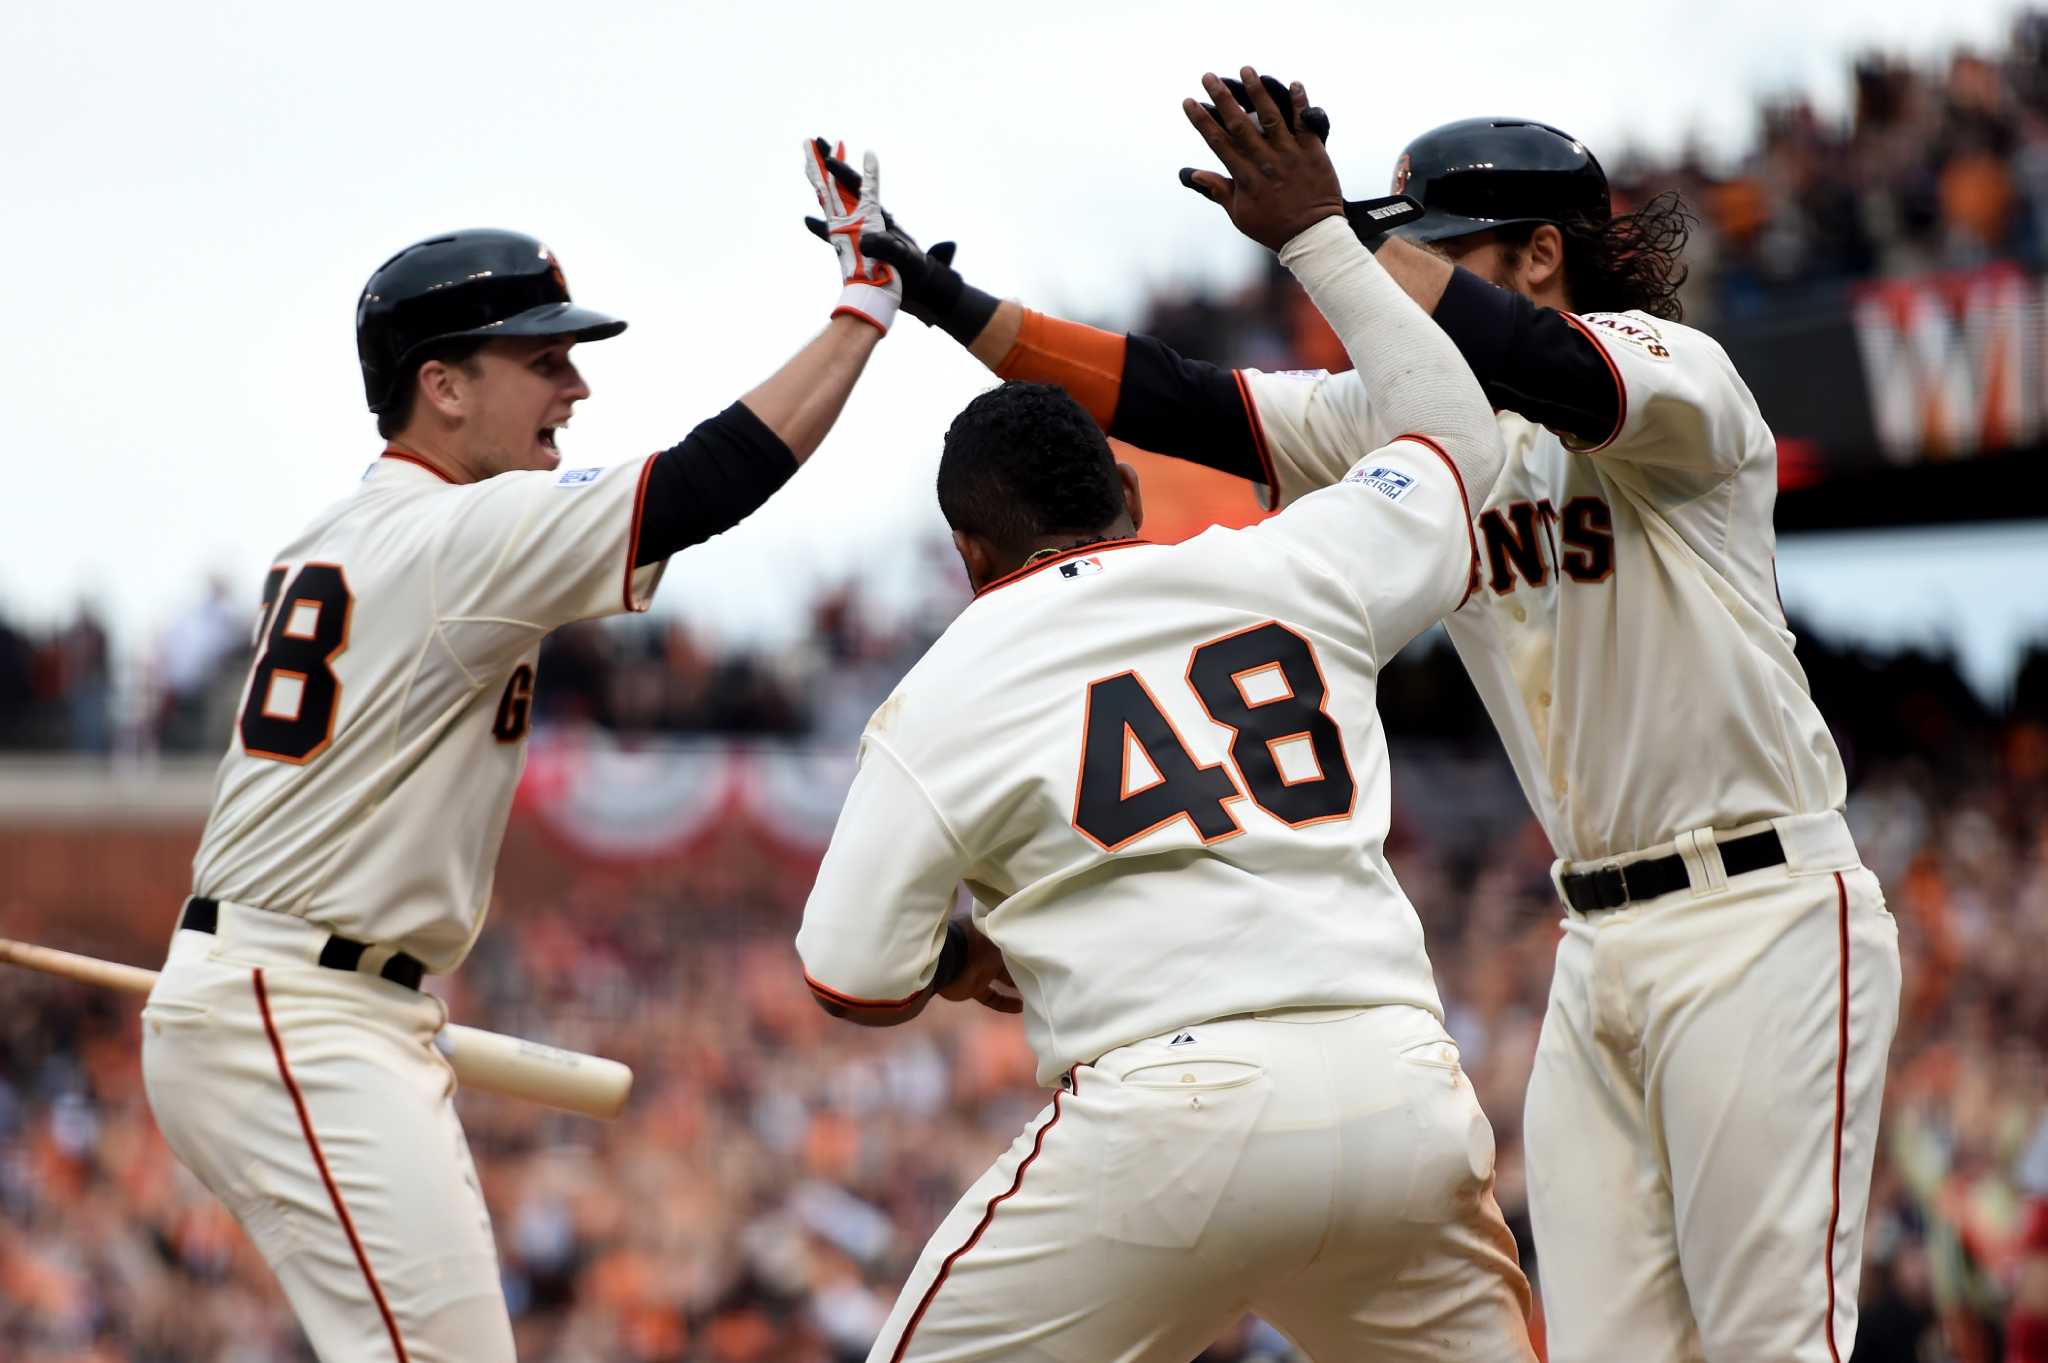 What Is The Score Of The Sf Giants Game Today